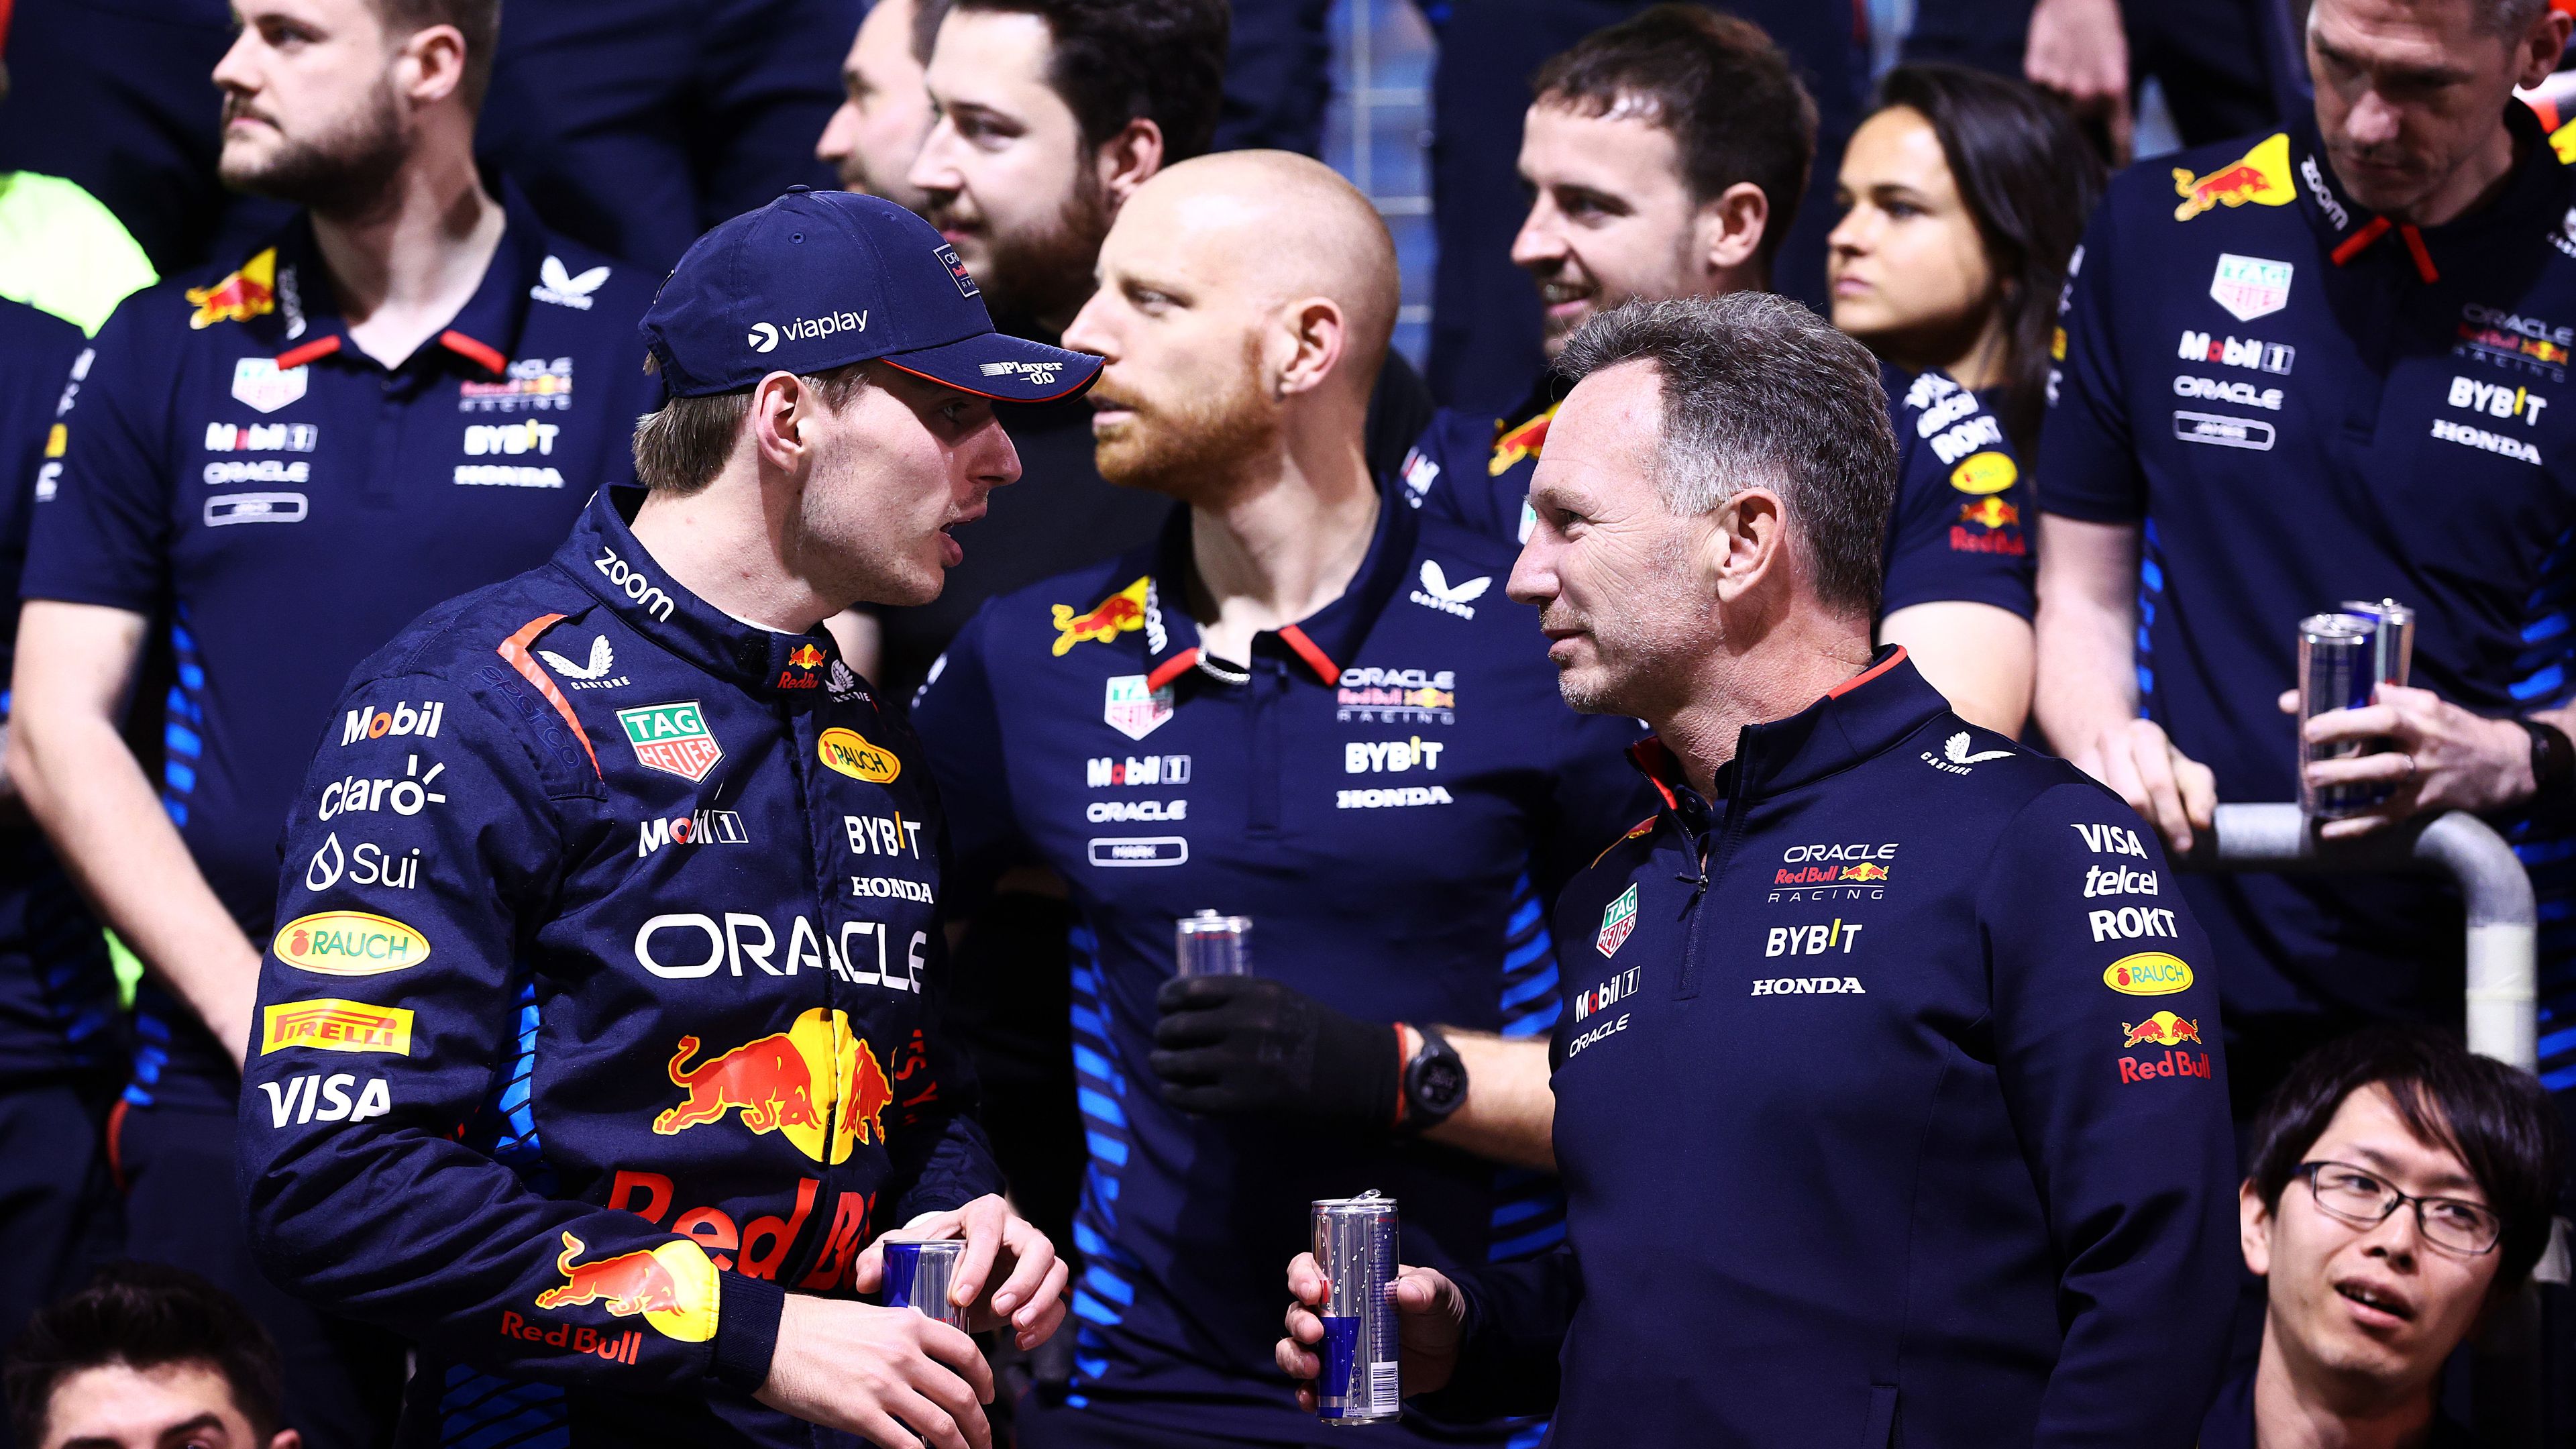 'Guilty of talking too much': Christian Horner feud fuels Max Verstappen to Mercedes rumour